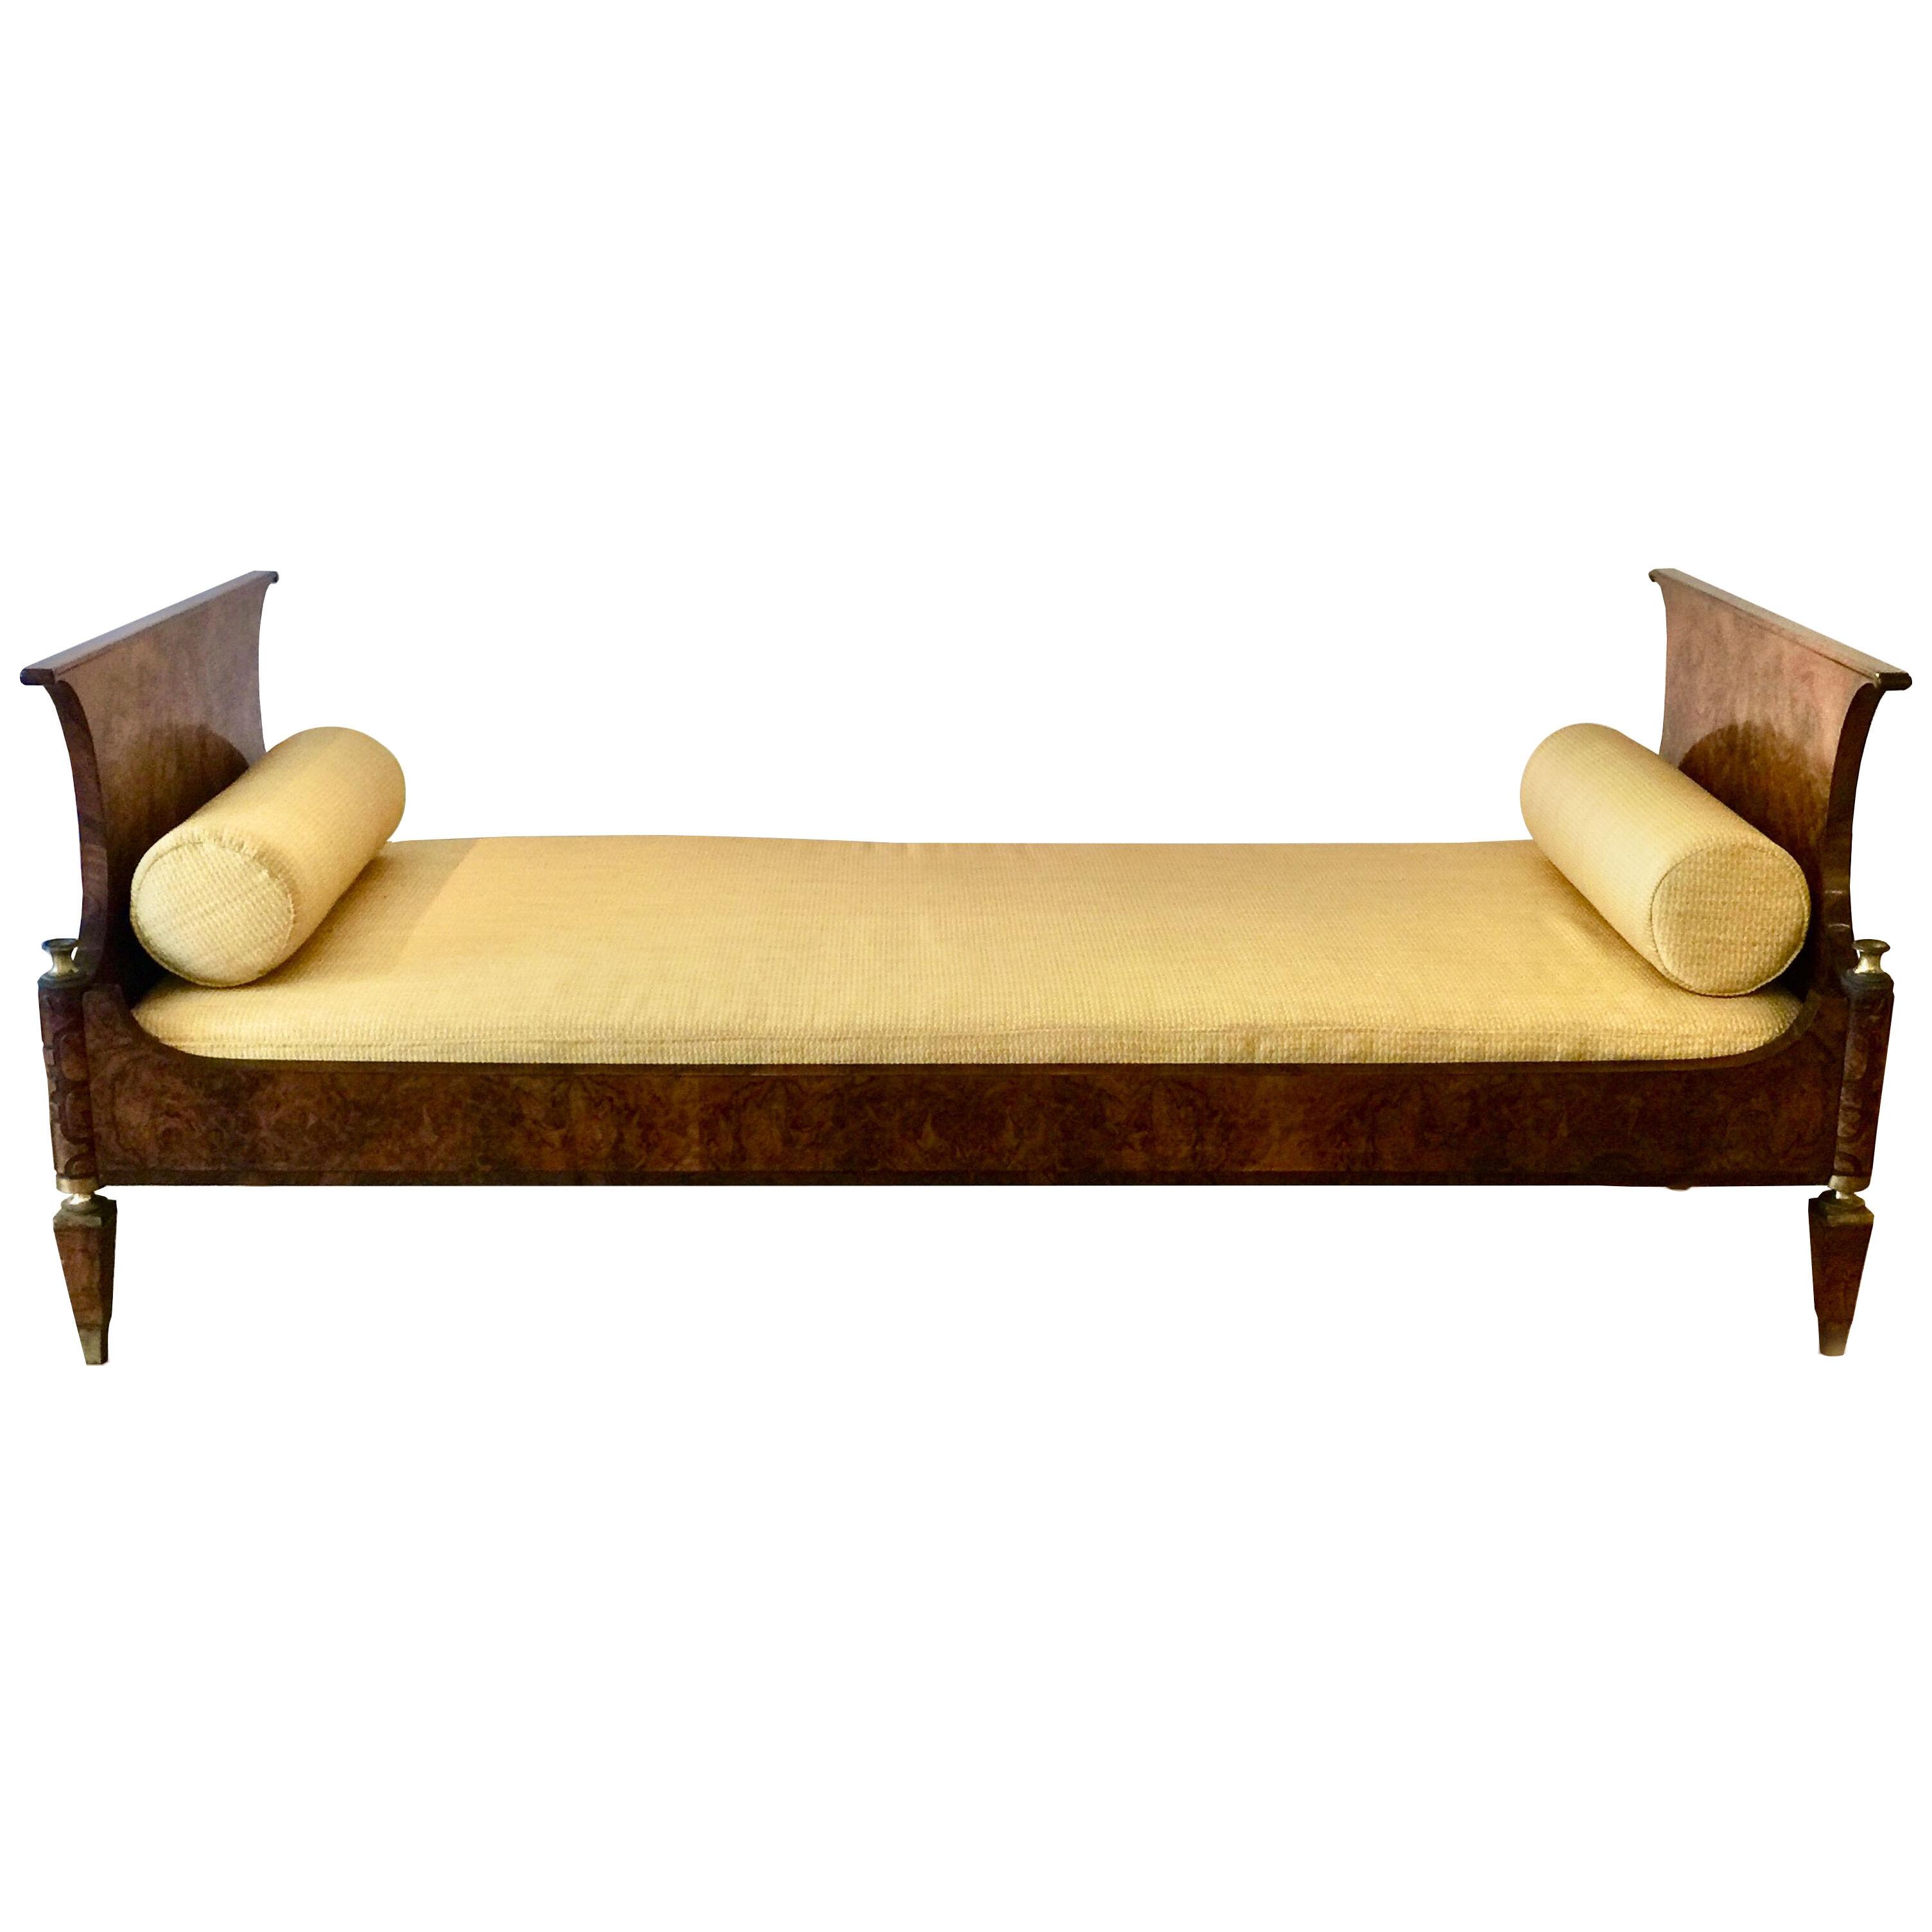 An Important Daybed by Gio Ponti, late 1920s